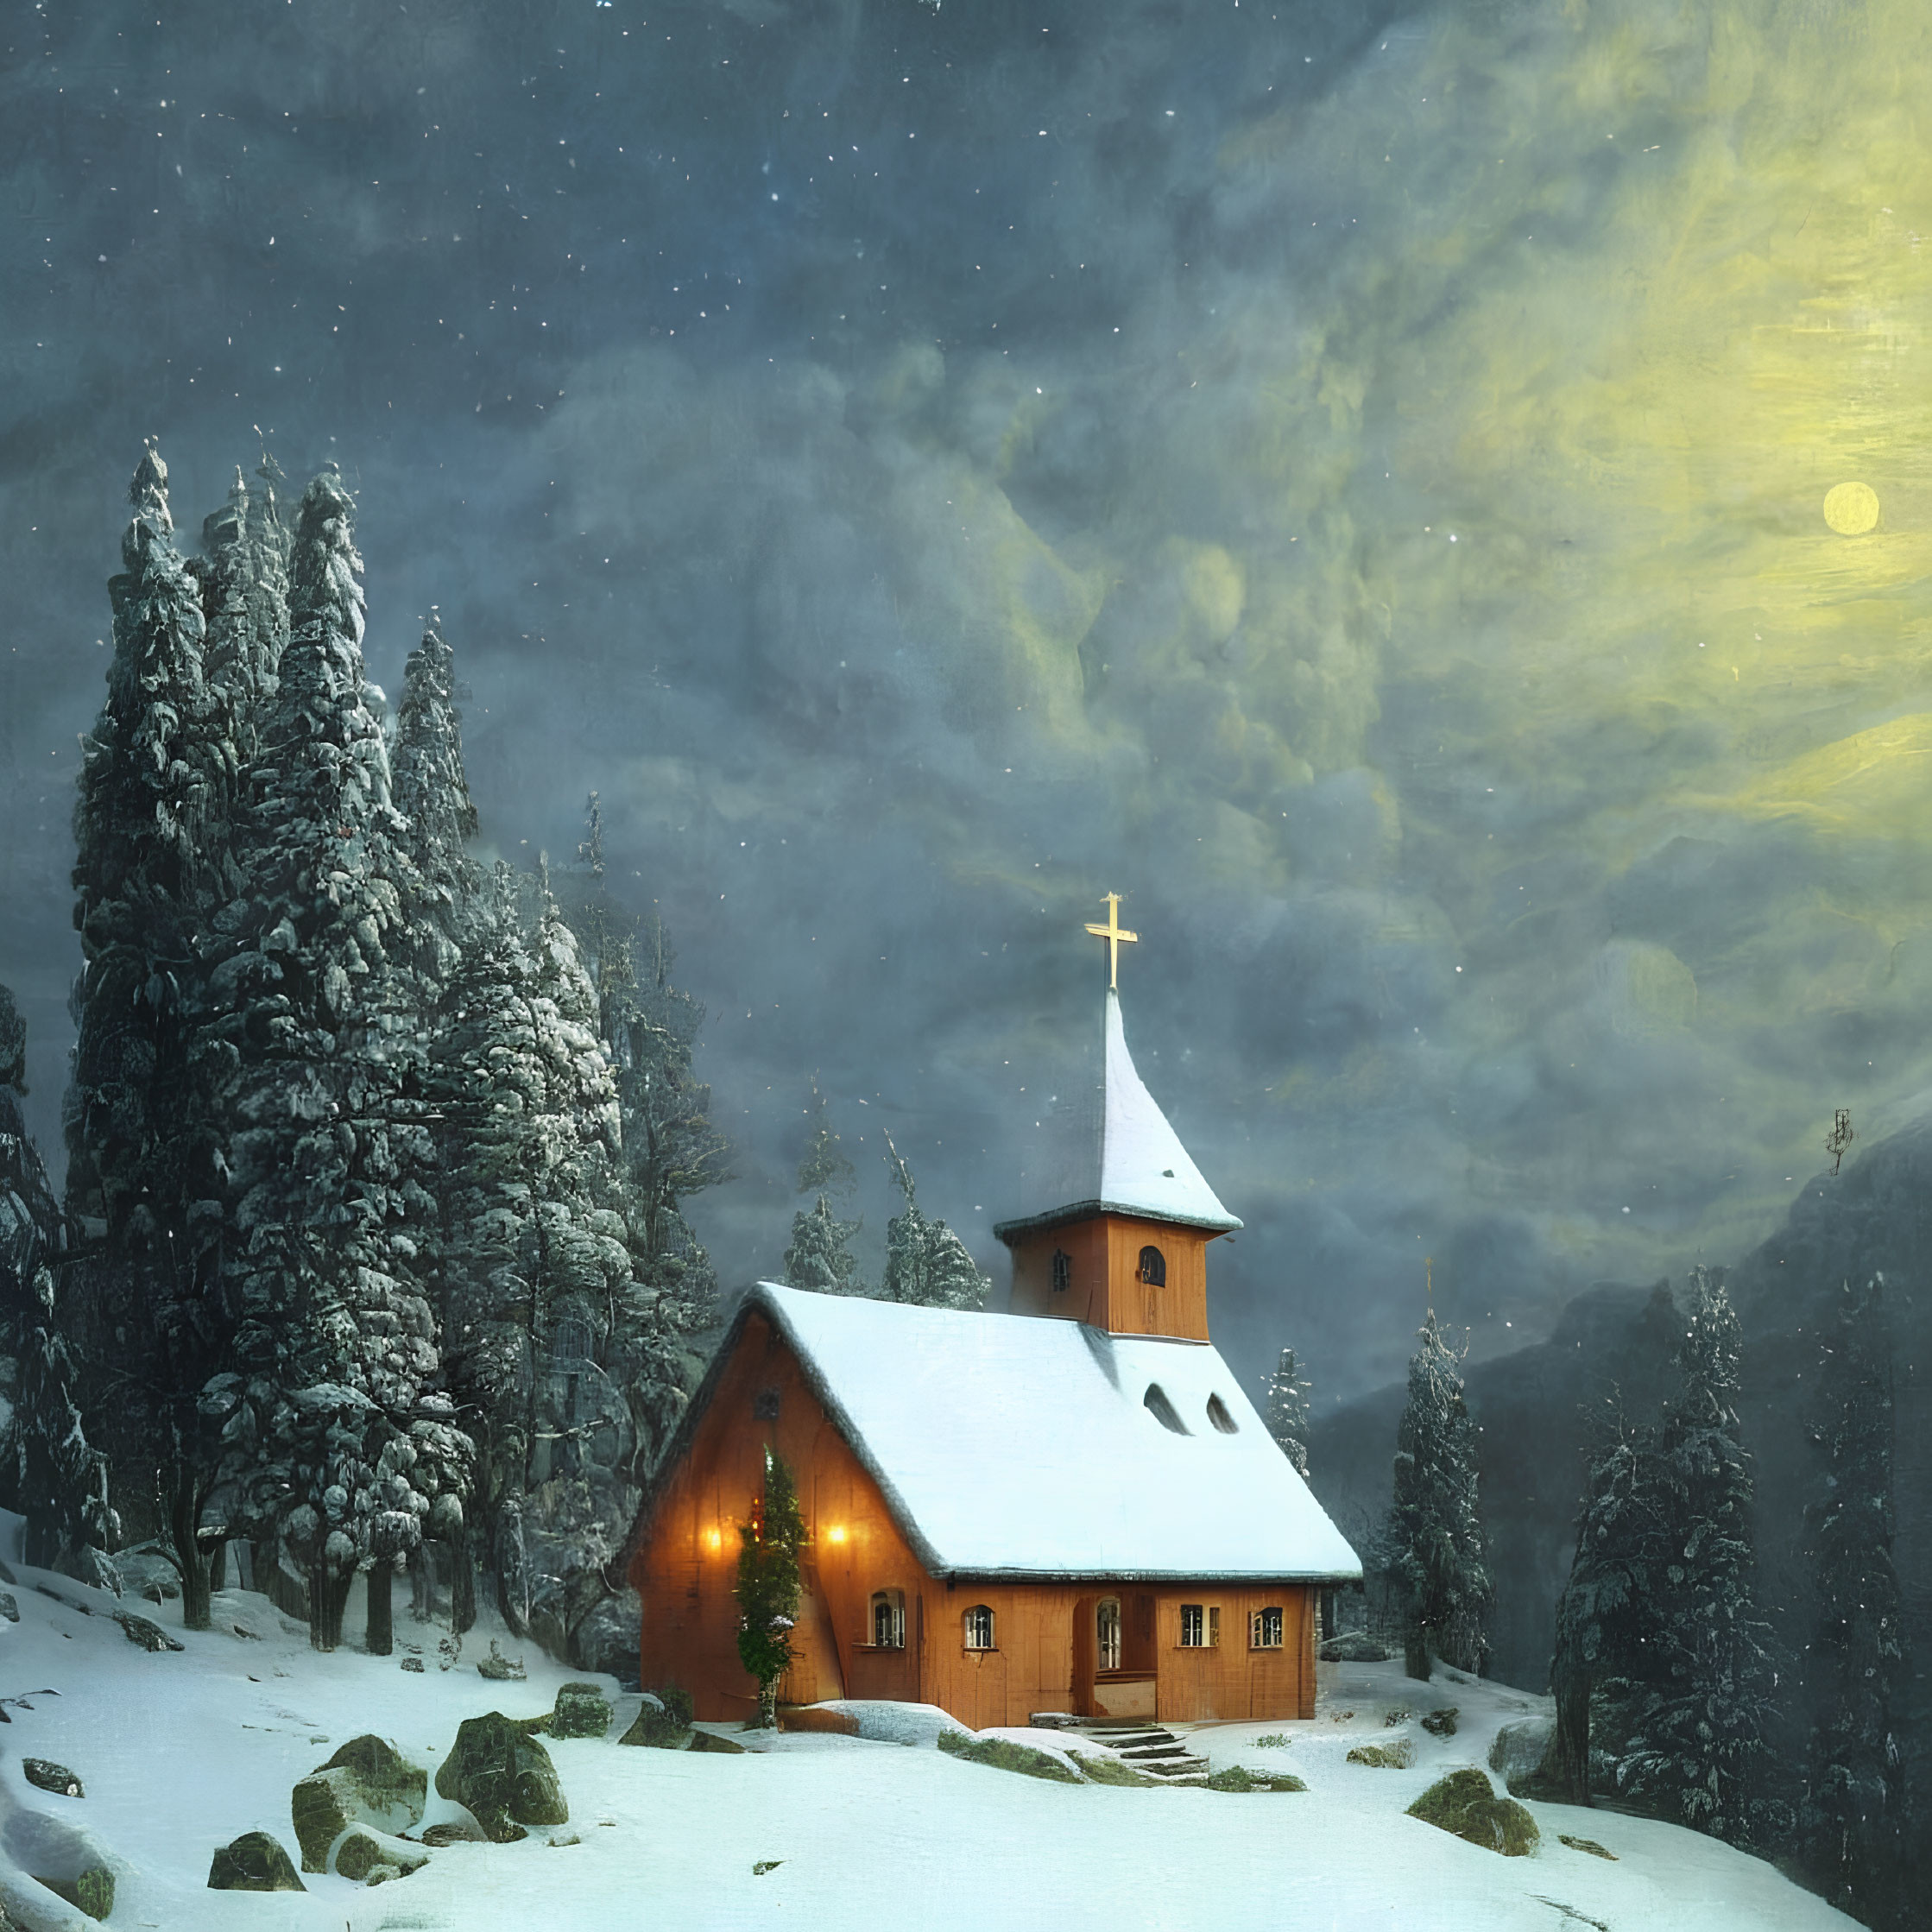 Snow-covered church with cross under night sky and pine trees: serene winter scene